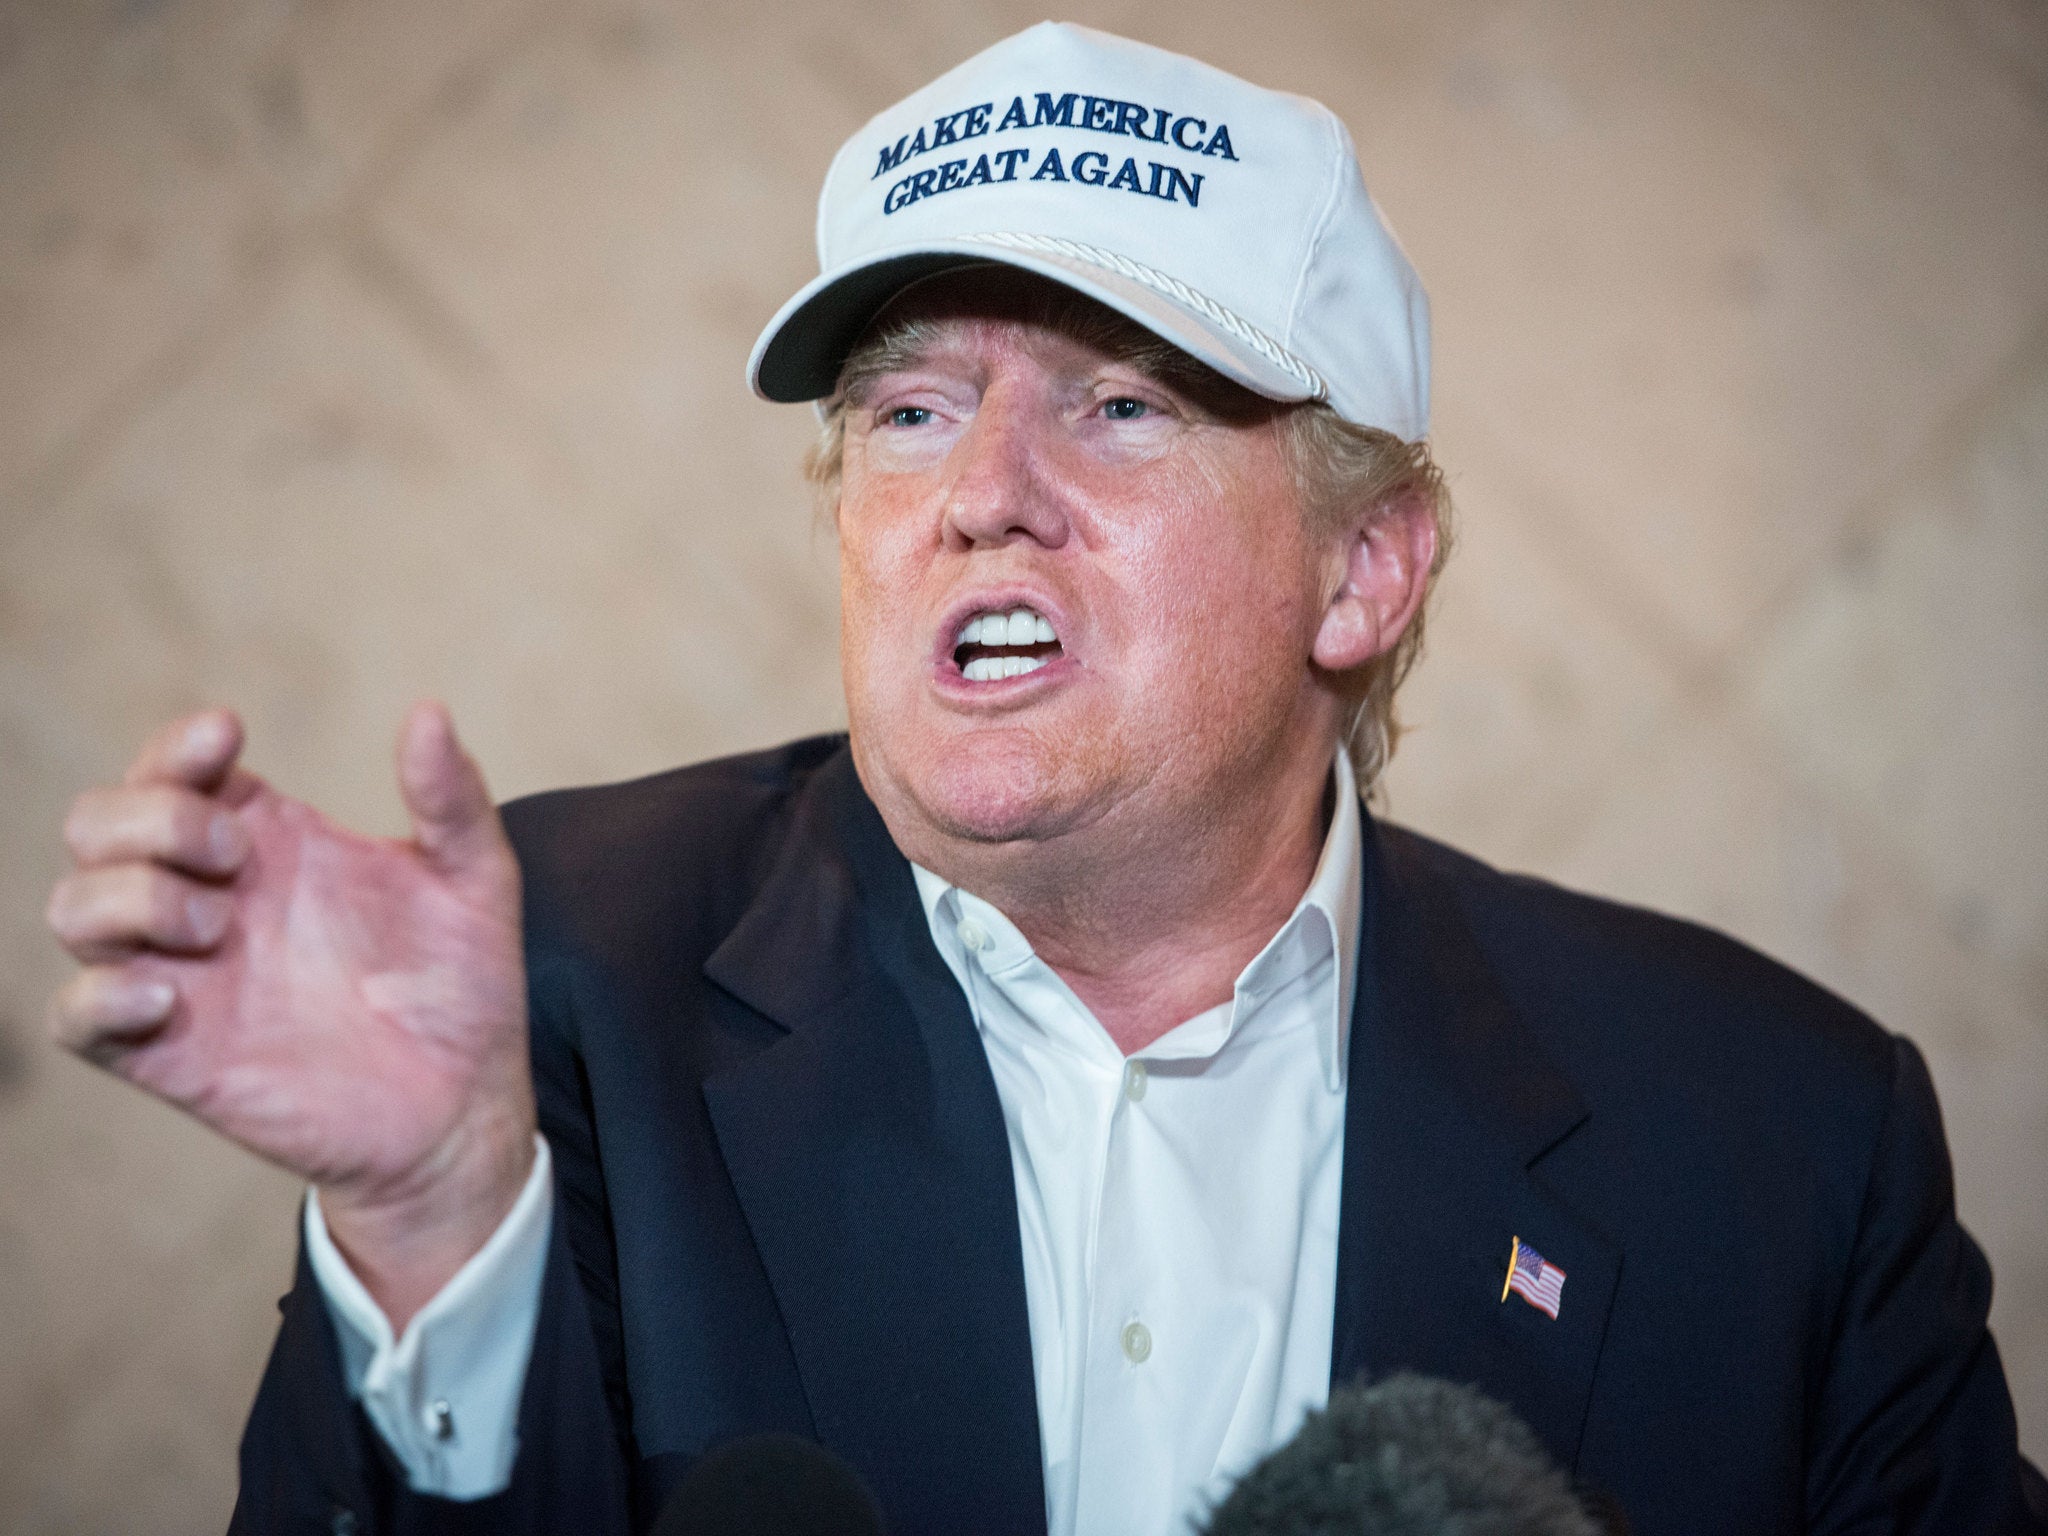 Donald Trump speaks at a press conference in Texas in July